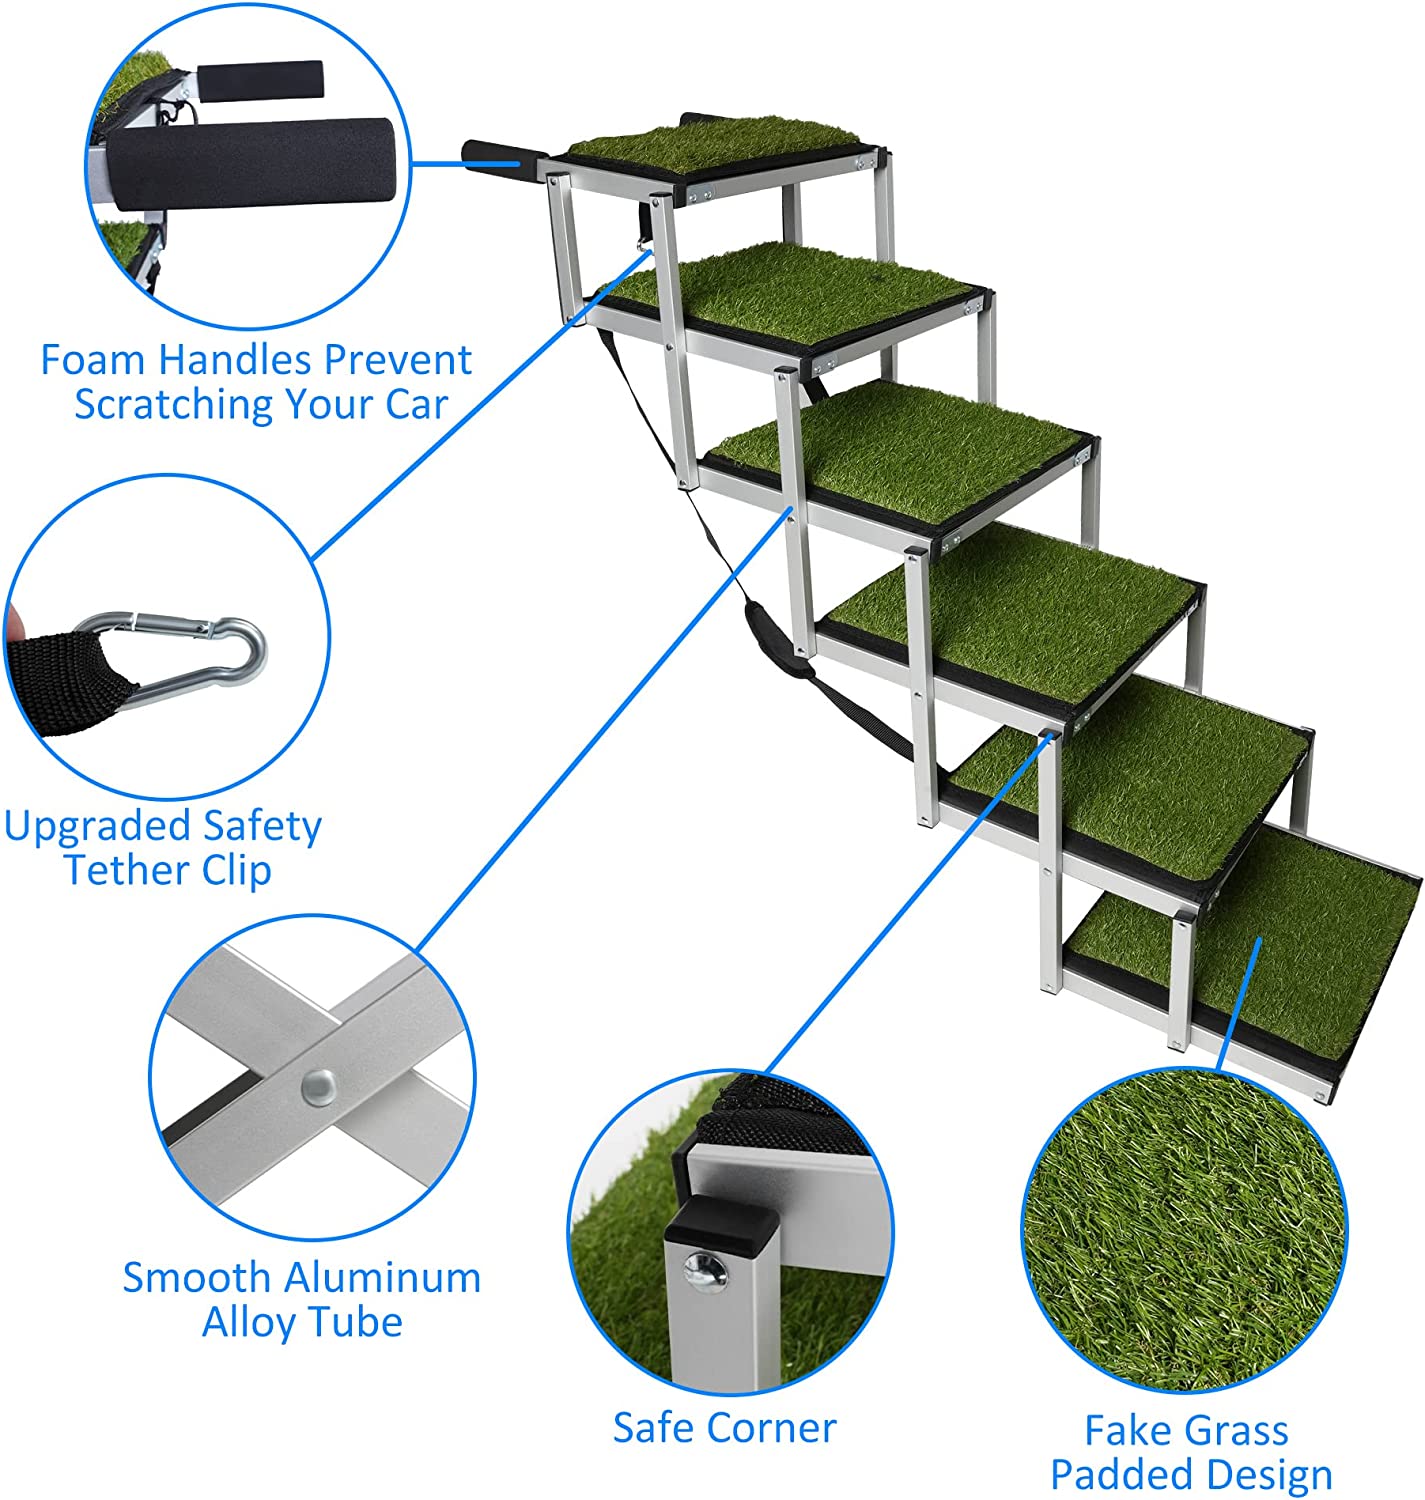 Foldable Aluminum Alloy 6 Steps Dog Stairs with Artificial Turf Non-Slip Surface for Large Dogs, Supports up to 150Lbs